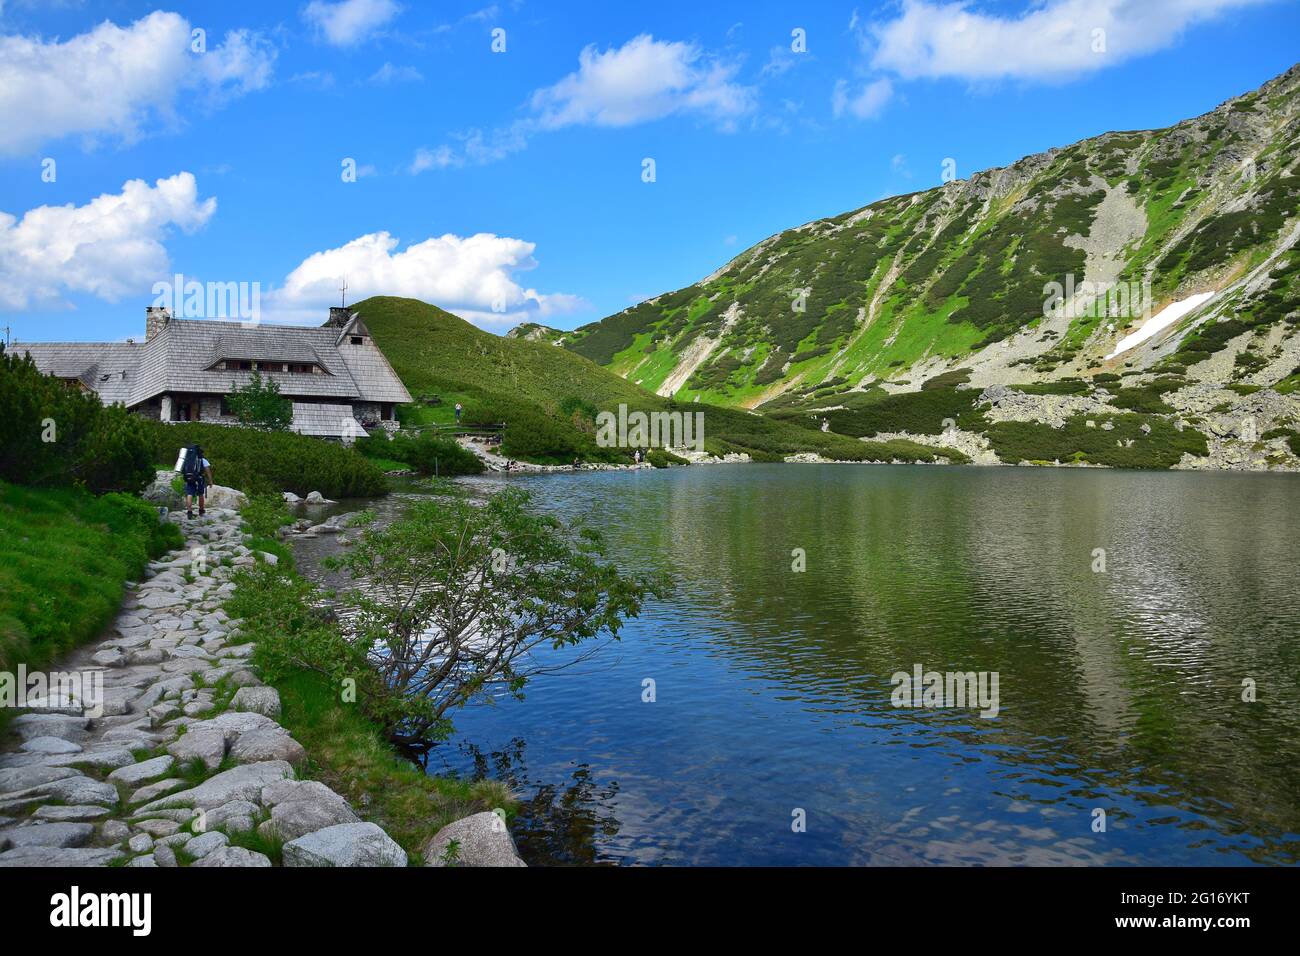 The beautiful lake Przedni Staw and the mountain lodge Schronisko Piec Stawow in the High Tatras, Poland. A trail with a hiker on the left. Stock Photo